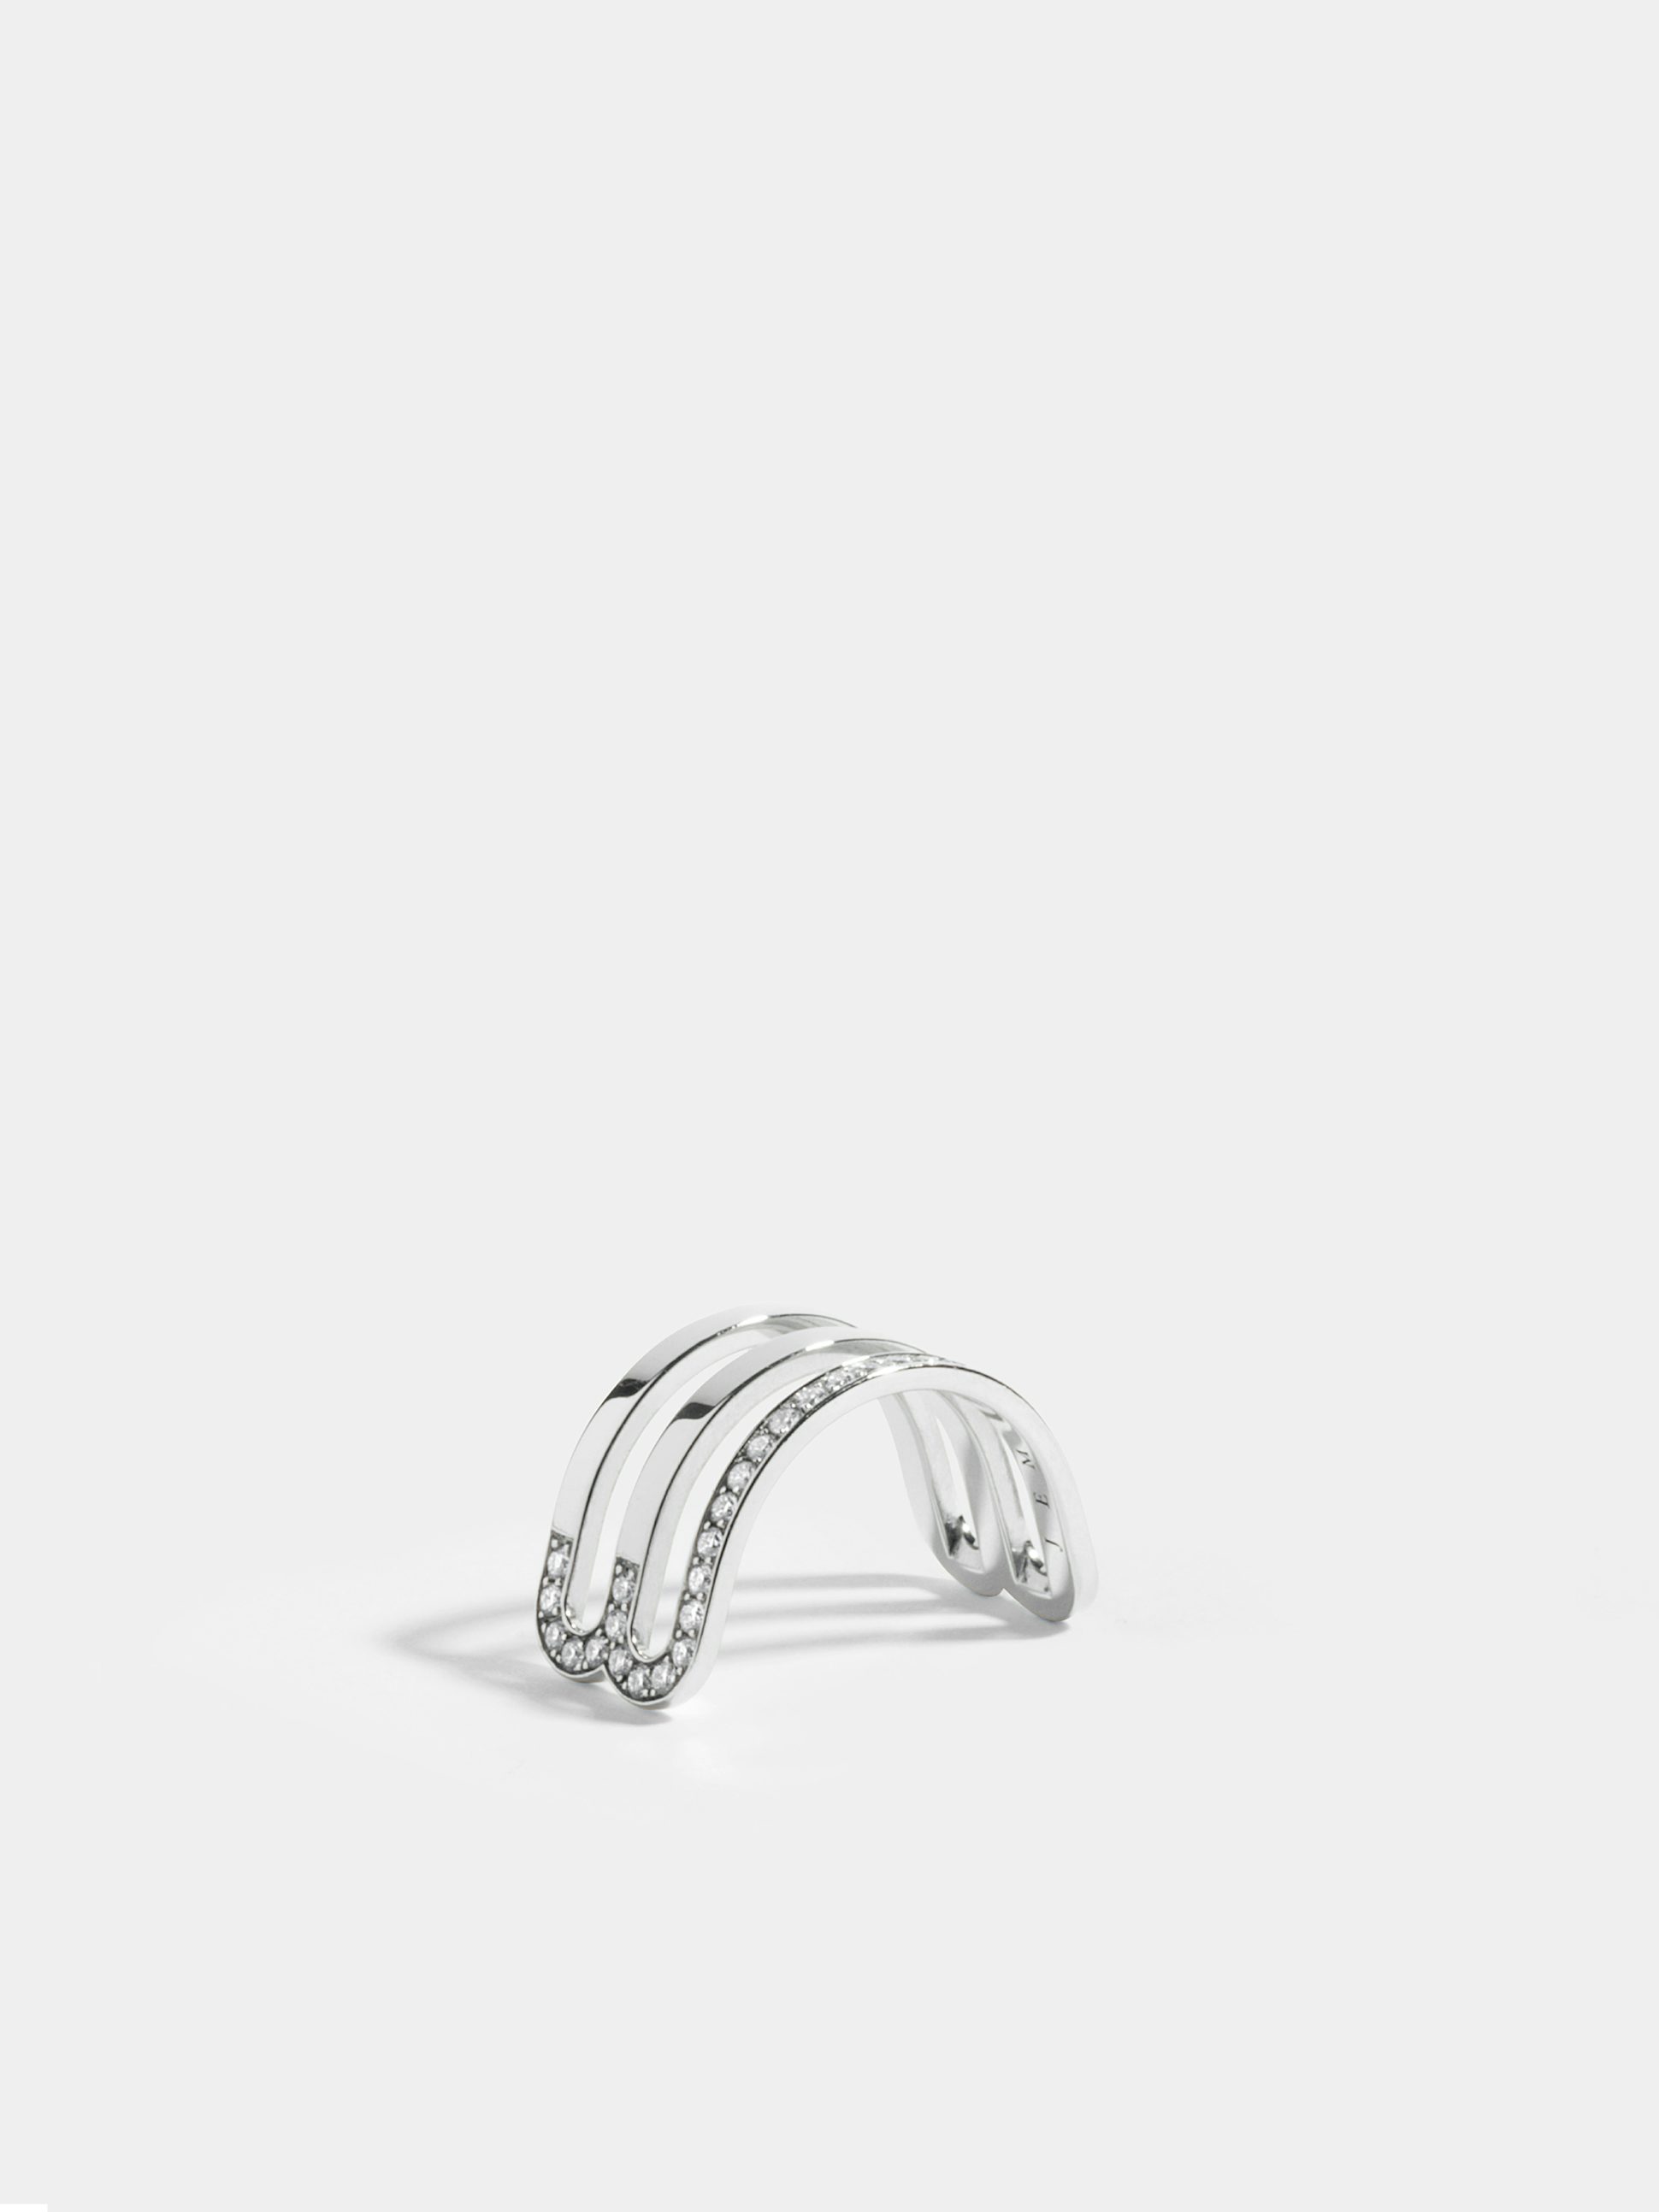 Étreintes double half-ring in 18k Fairmined ethical white gold, paved with lab-grown diamonds on one line.